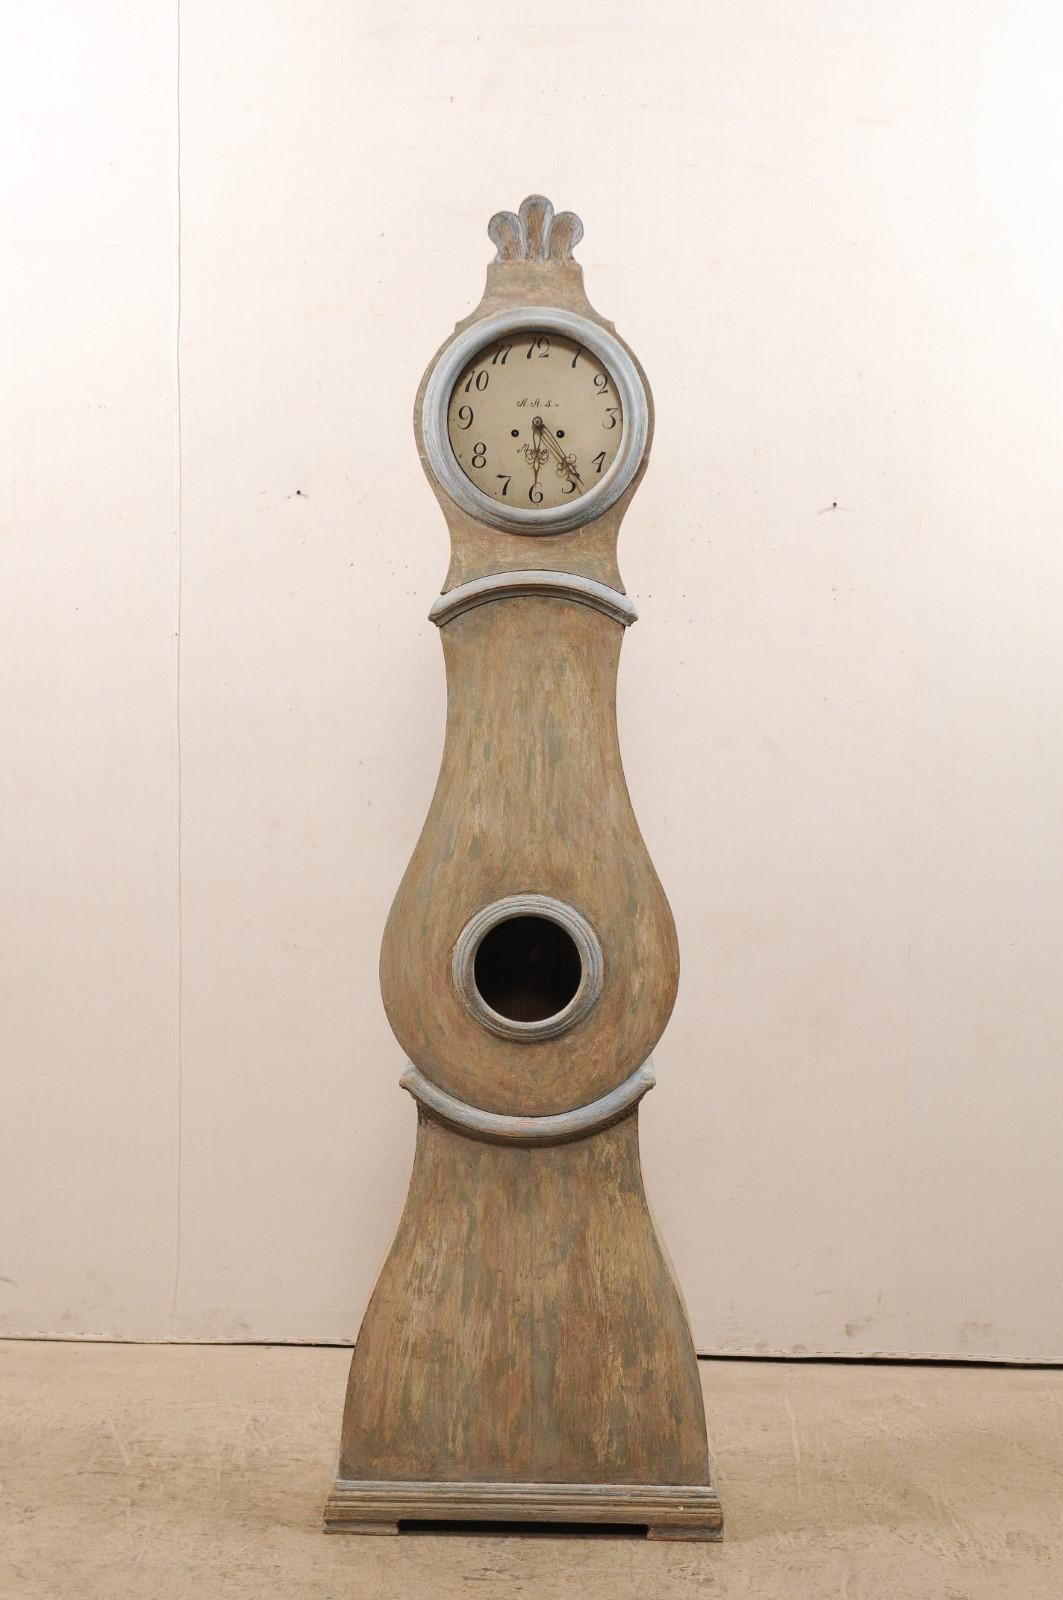 A beautiful Swedish painted wood Mora clock from the 19th century. This antique Mora clock from Sweden features a fanned carved wood crest adorning it's head, a teardrop-shaped door and belly, and a flat base which is slightly lifted upon